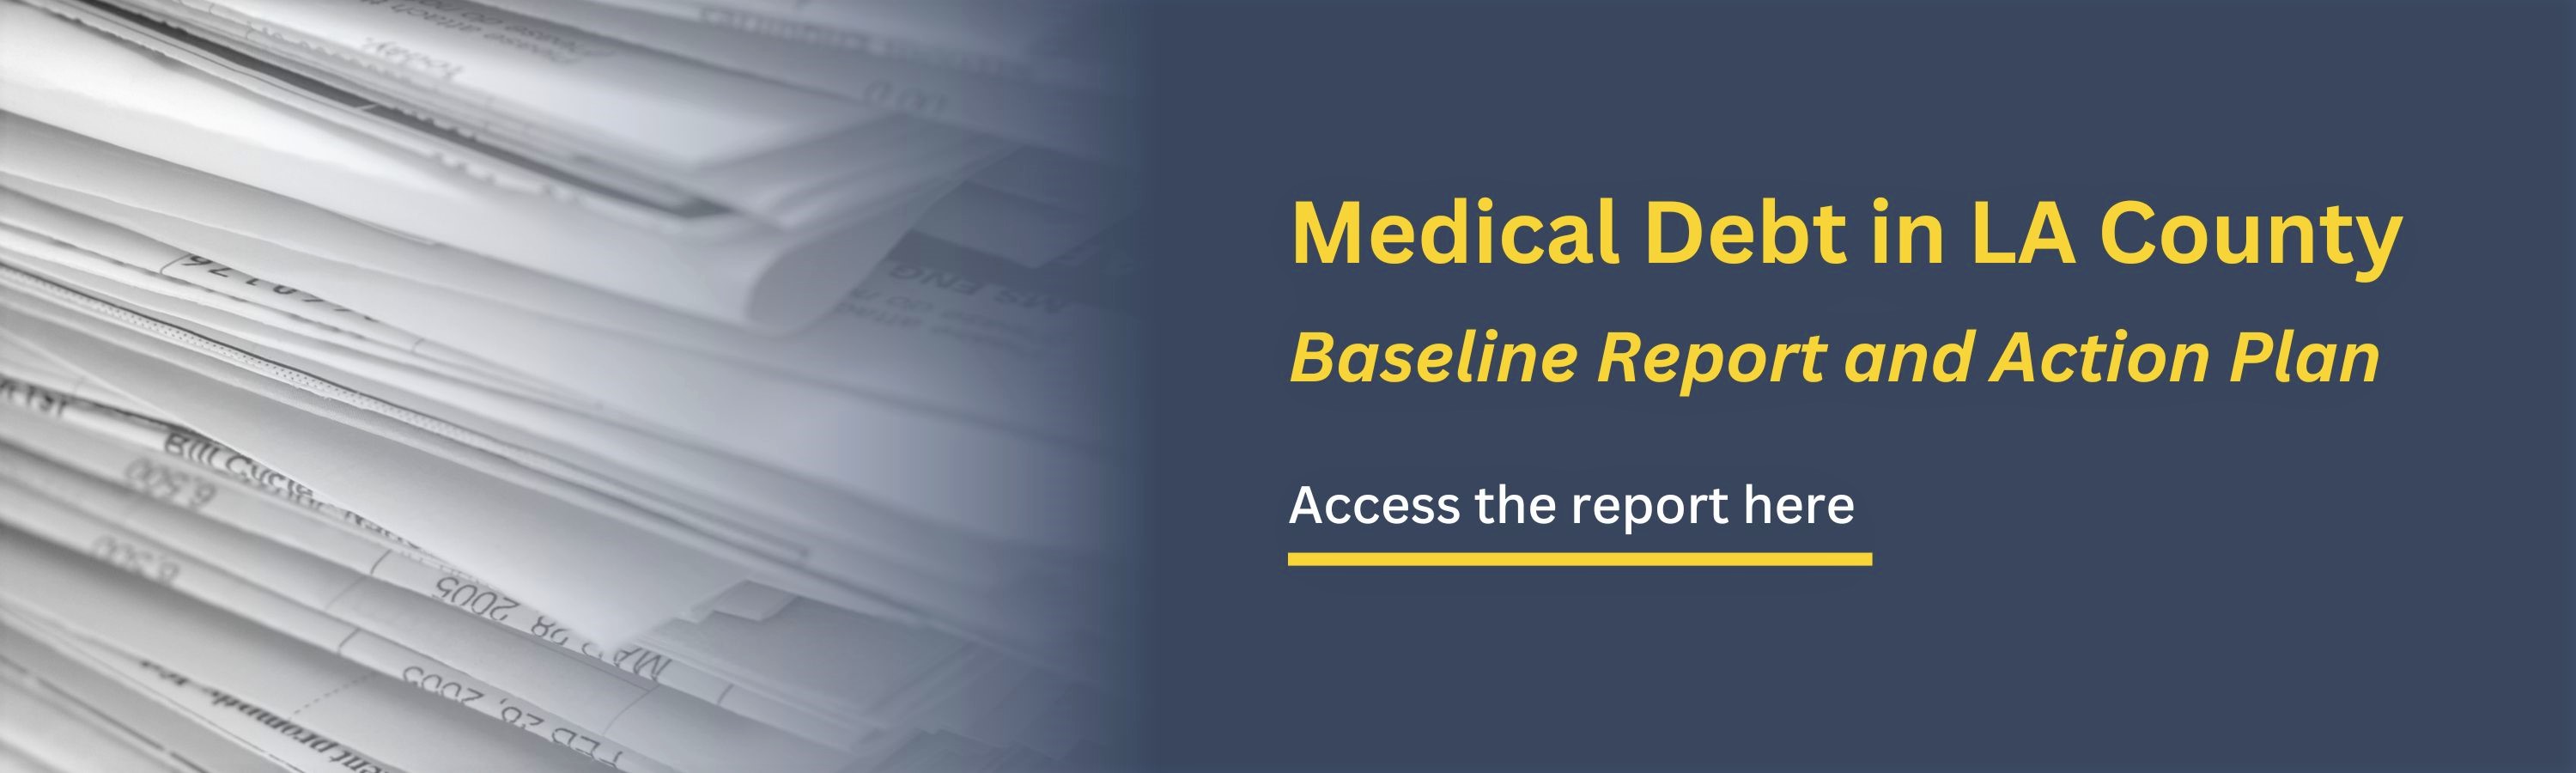 Medical Debt in LA County Baseline Report and Action Plan 2023